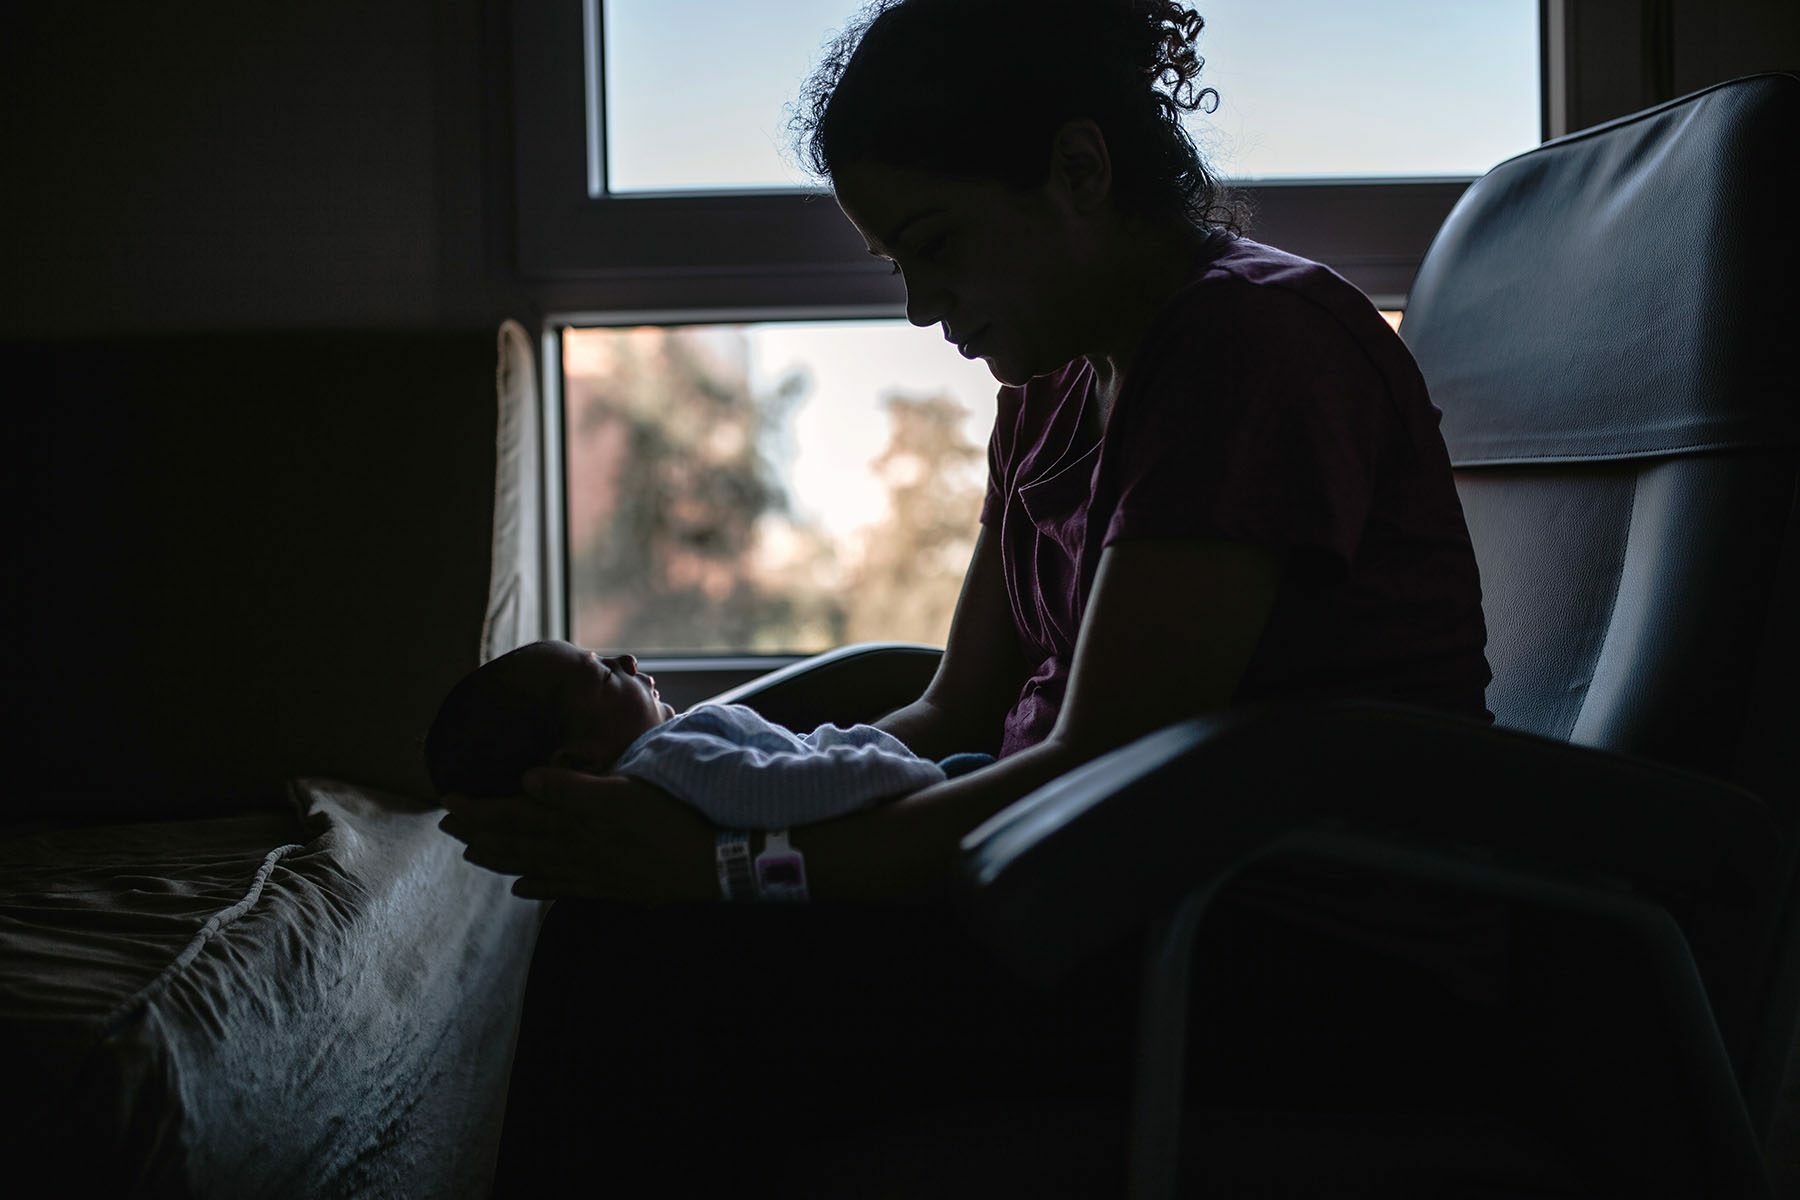 Silhouette of Woman Holding Newborn Son While Sitting On Chair In a Hospital